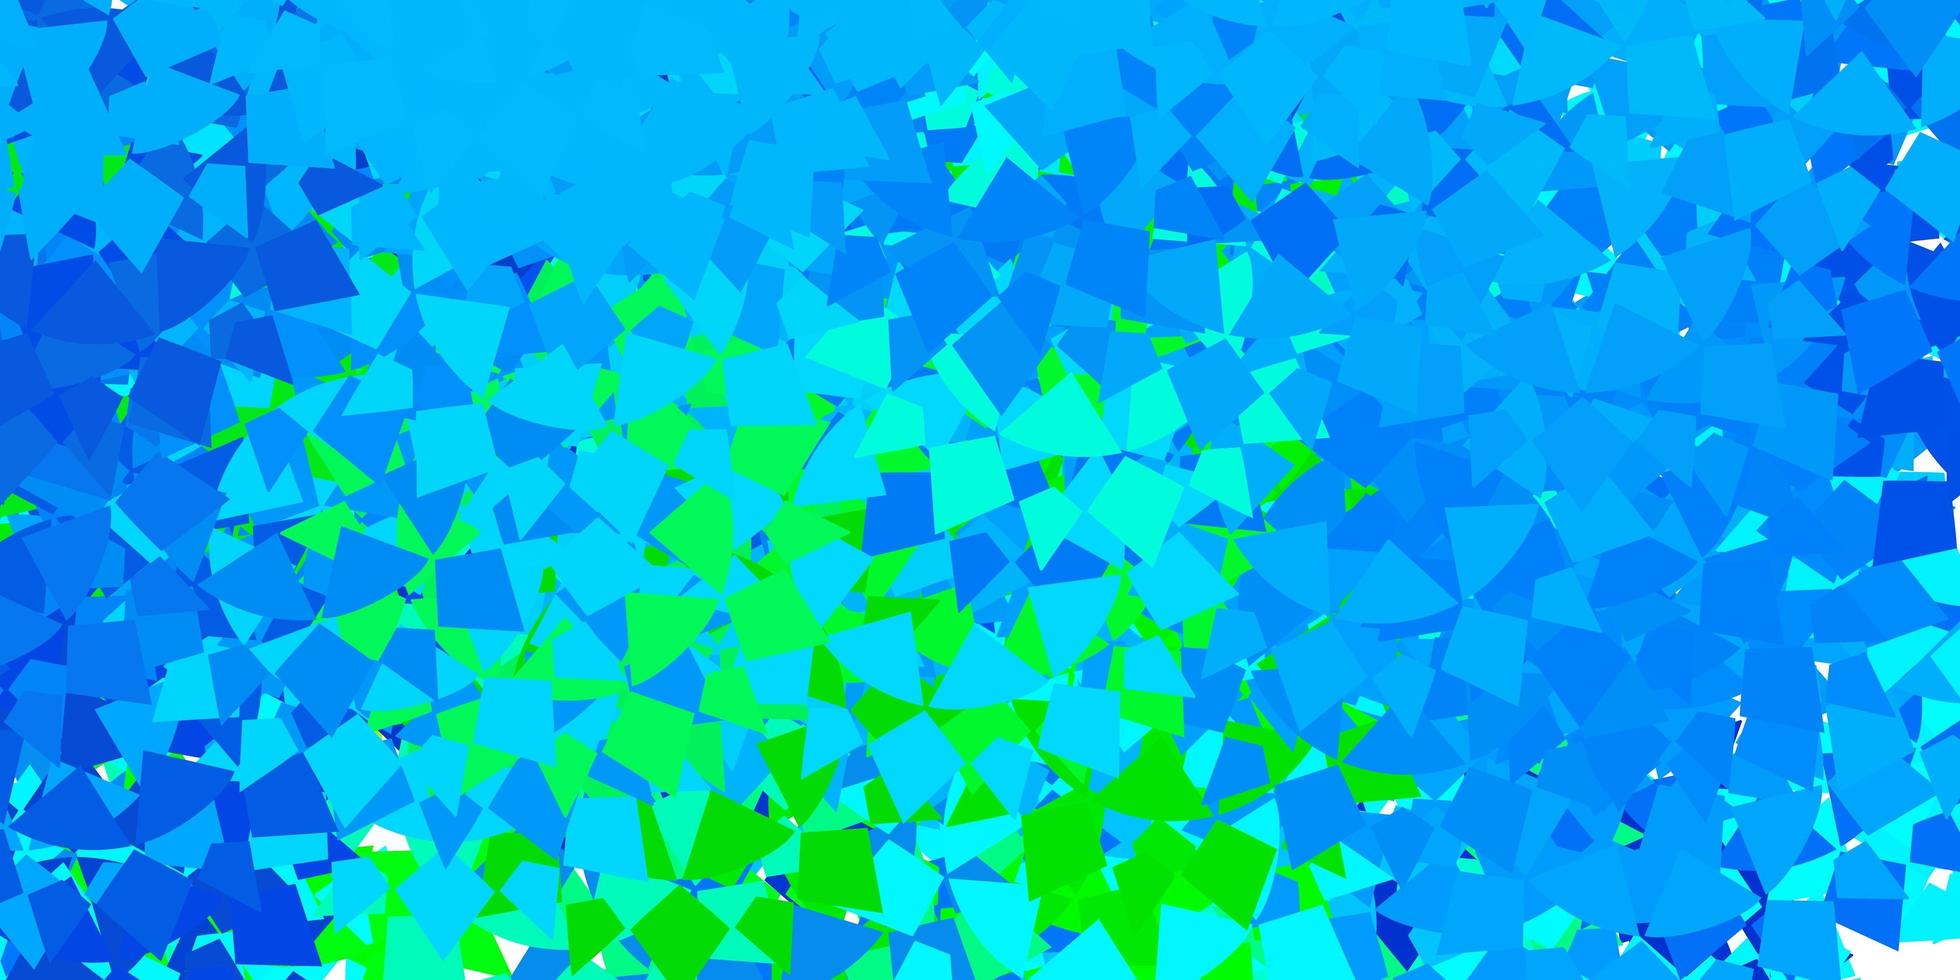 Dark blue green vector background with polygonal forms